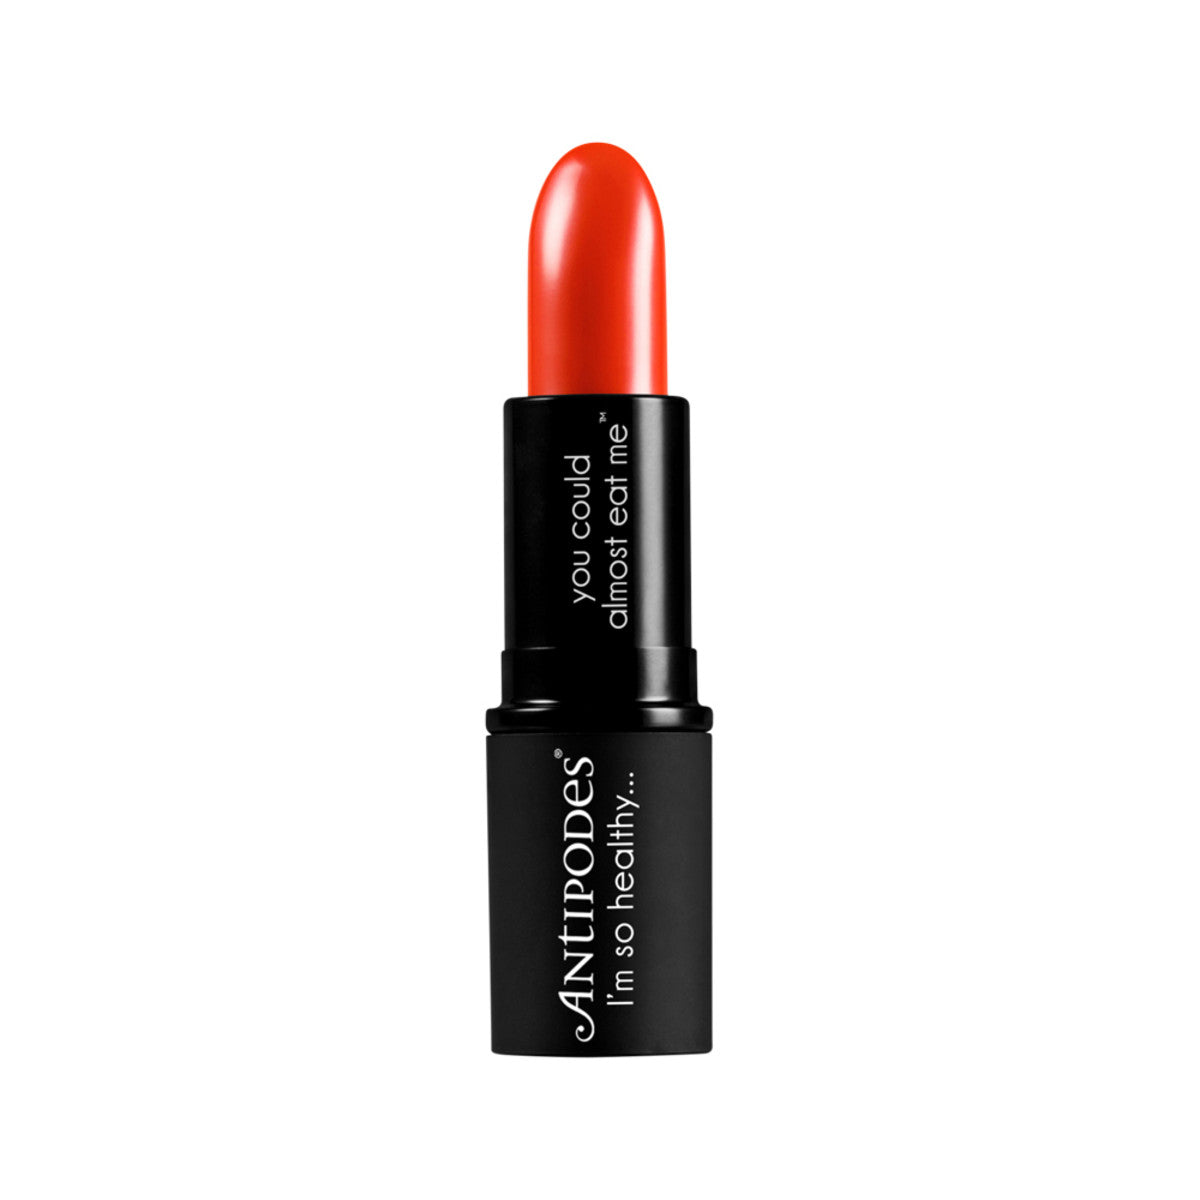 Antipodes West Coast Sunset Moisture-Boost Natural Lipstick 4g-The Living Co.